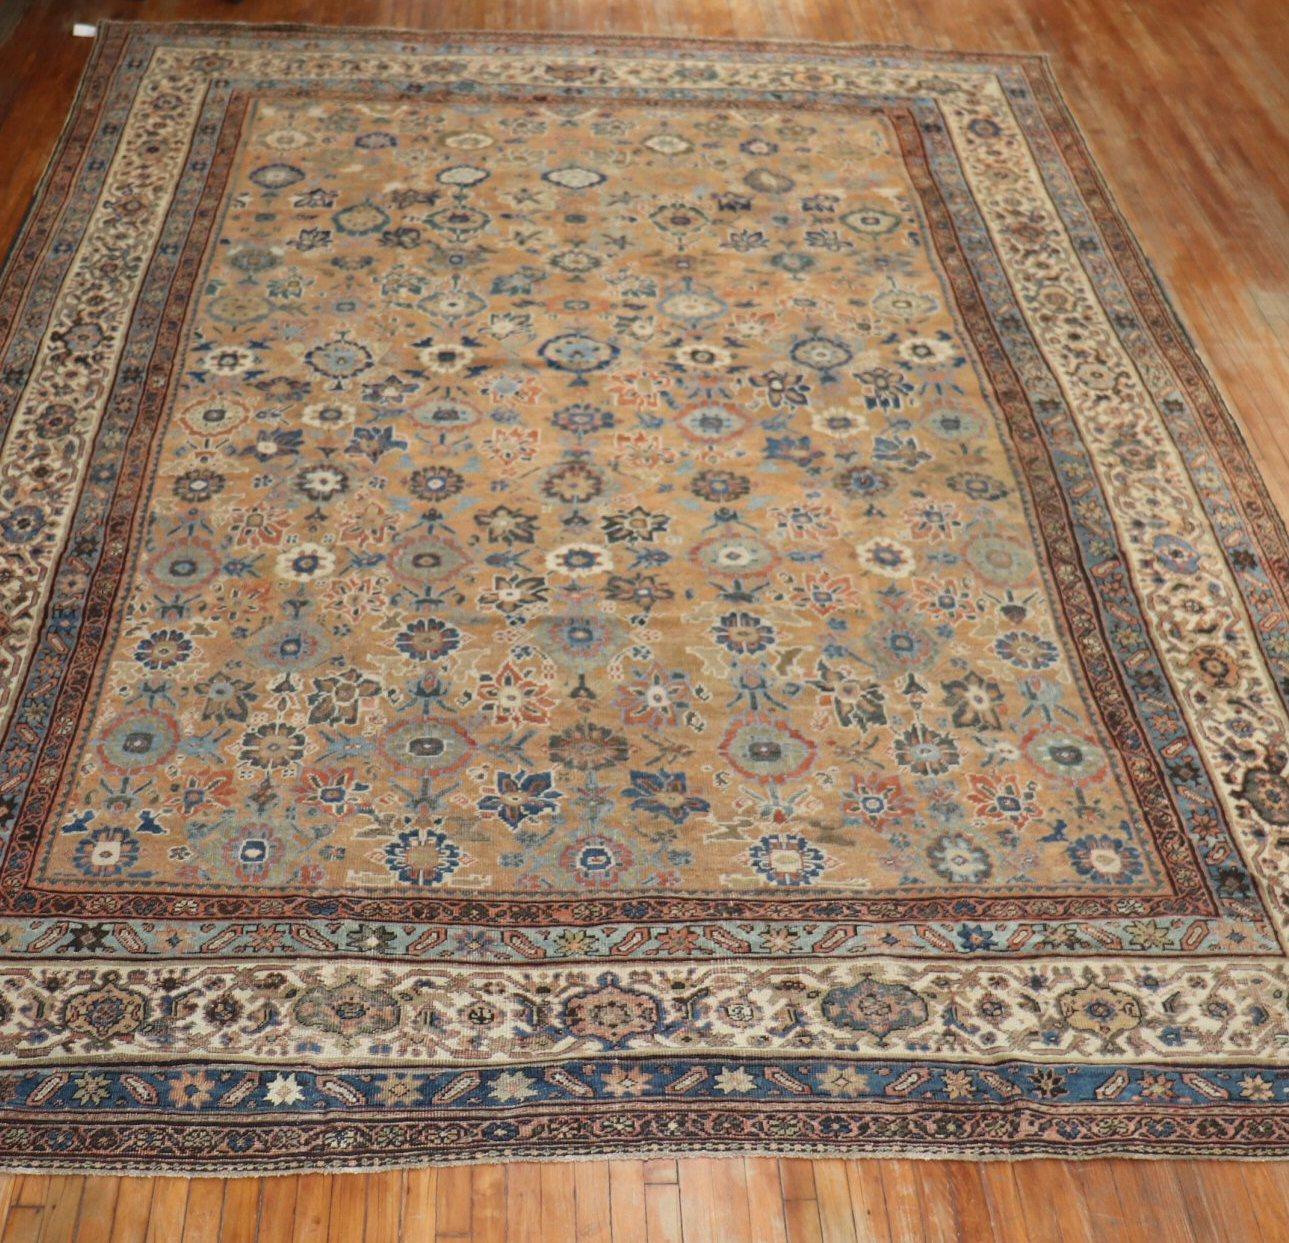 An early 20th century antique Persian Mahal rug in rust and earth tones.

Measures: 11'6'' x 16'6''.